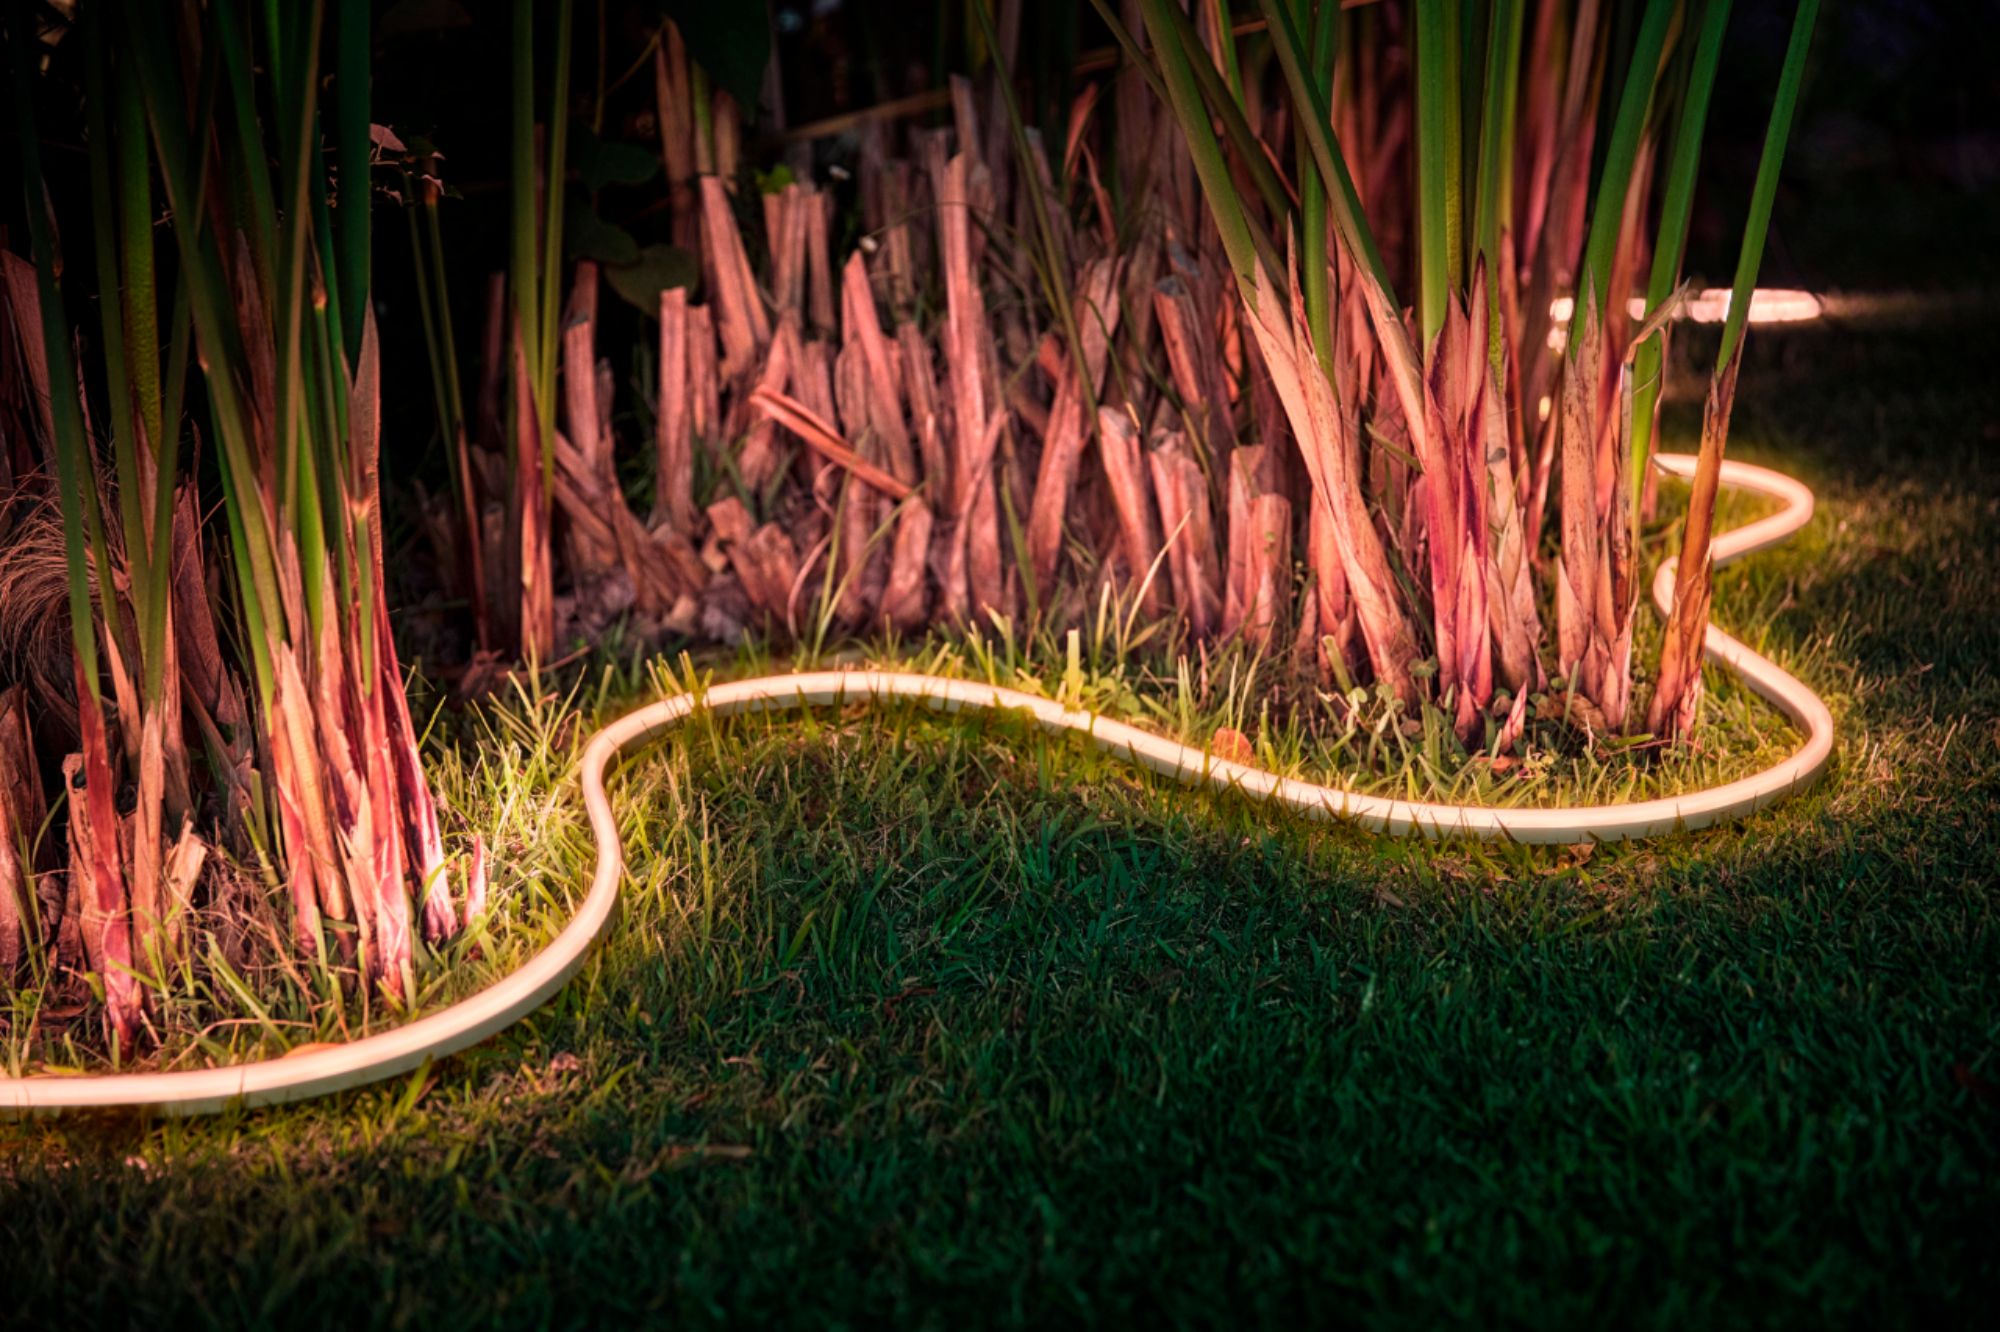 Philips HUE Outdoor 2m/5m Lightstrip – A&S Lighting and Curtain Gallery